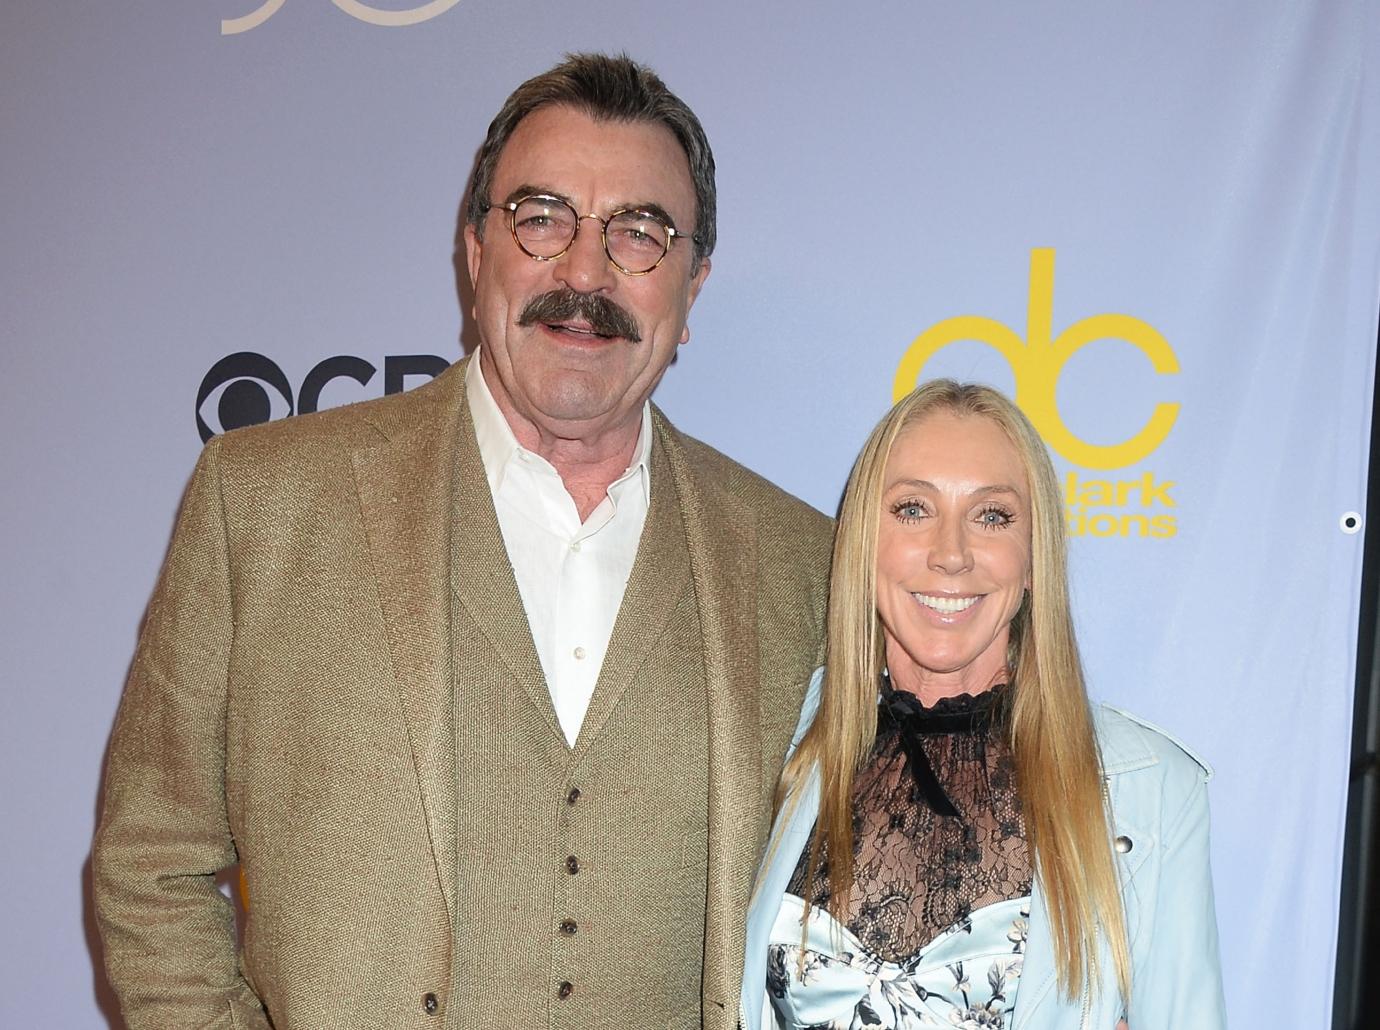 Tom Selleck's Net Worth - How Rich is Magnum P.I?